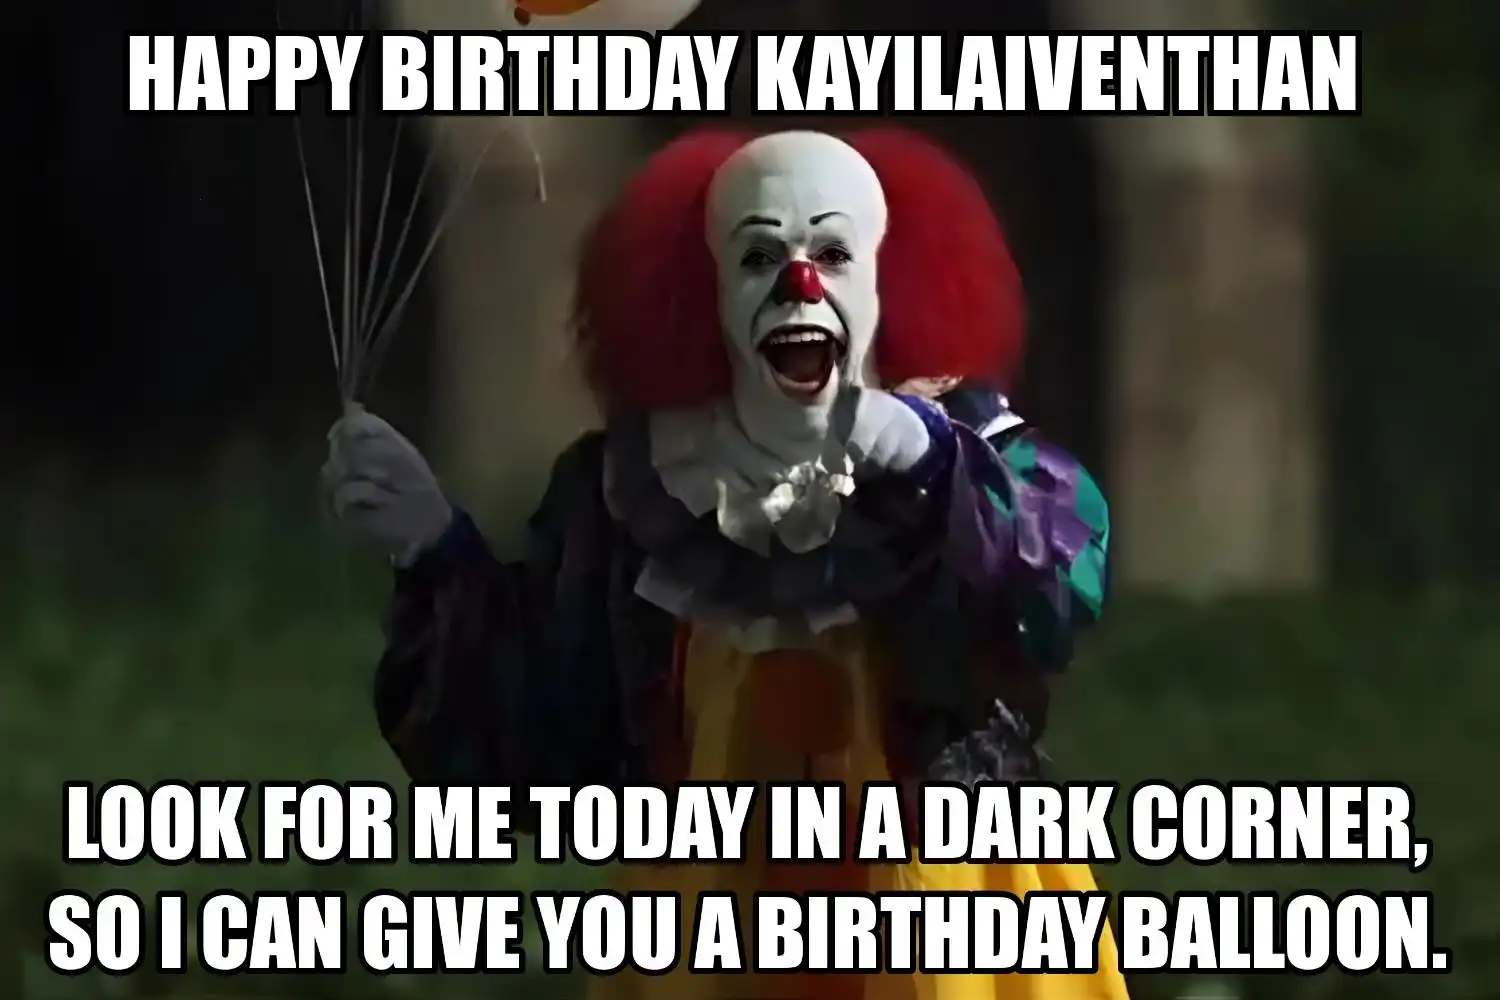 Happy Birthday Kayilaiventhan I Can Give You A Balloon Meme